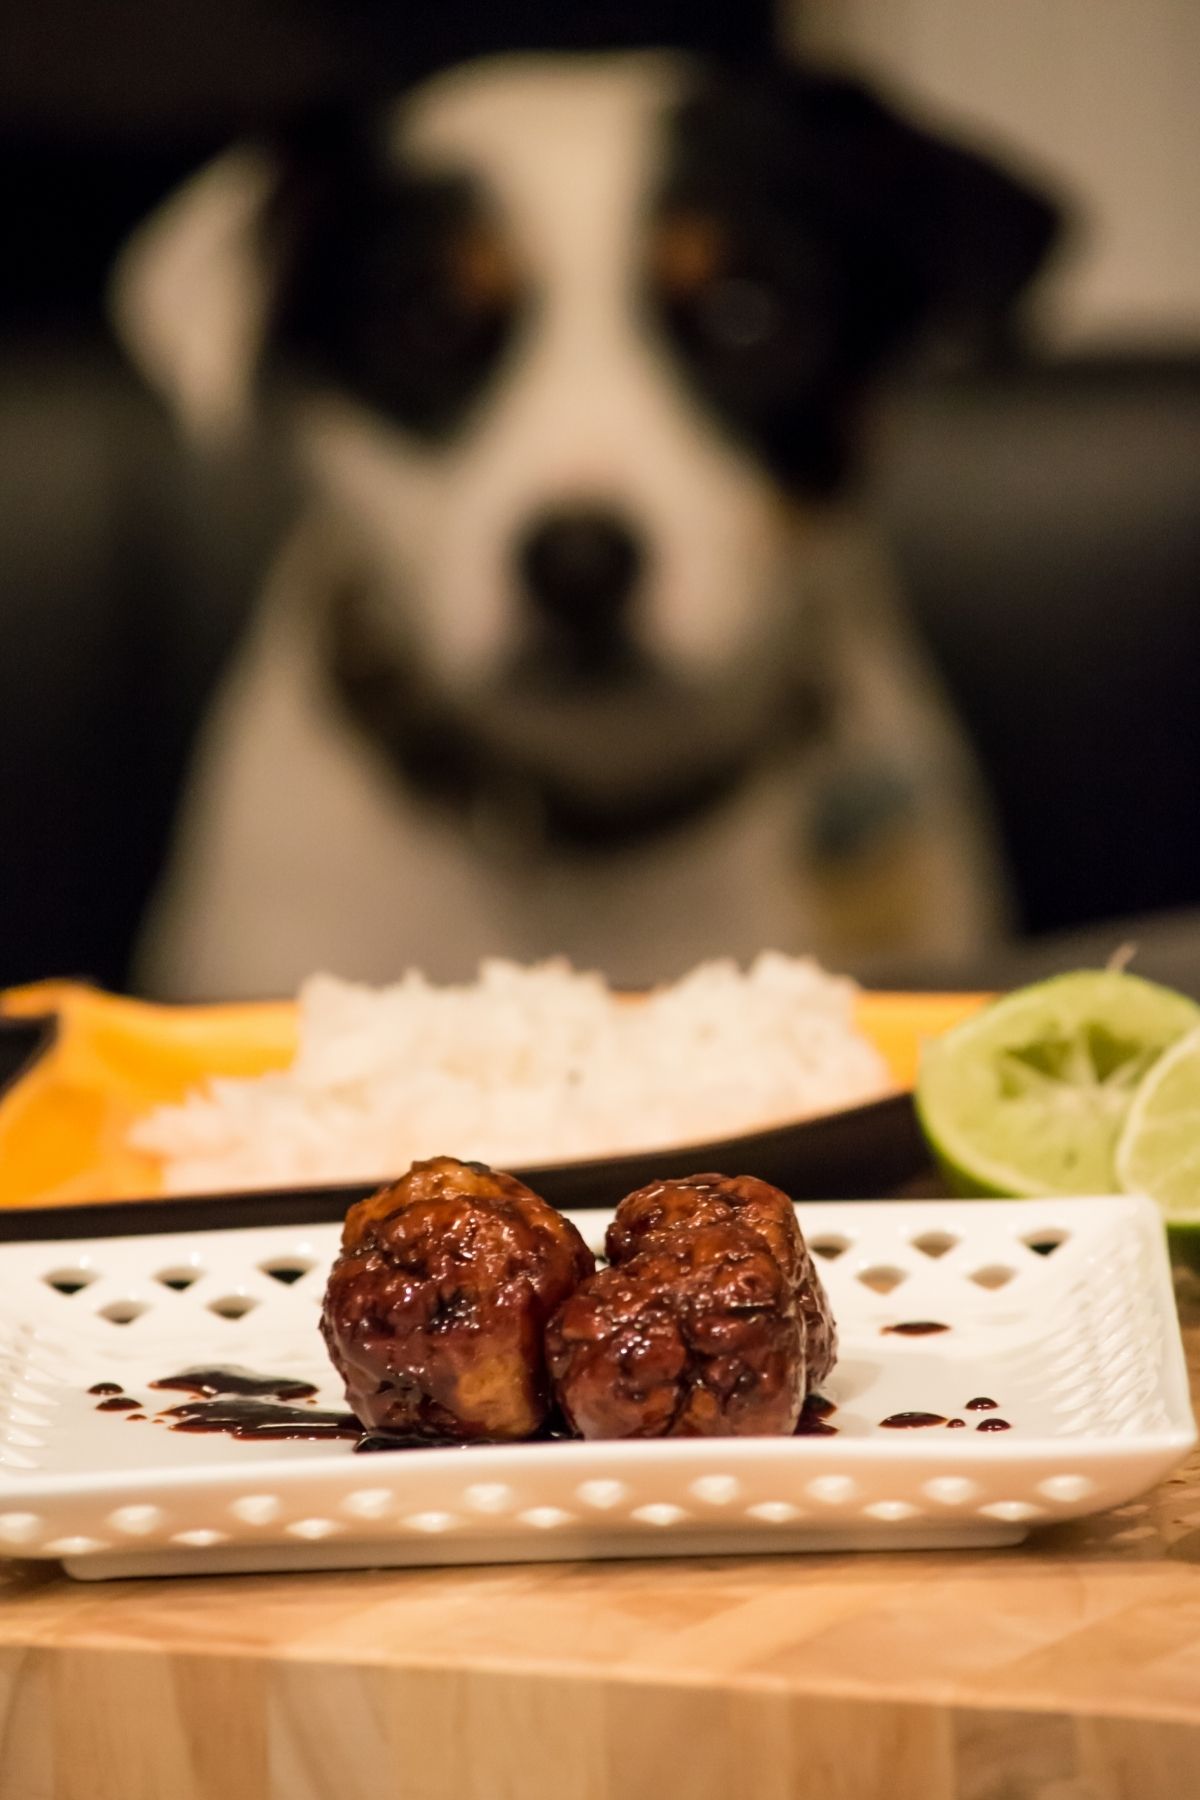 Meatballs on plate with rice and cute dog